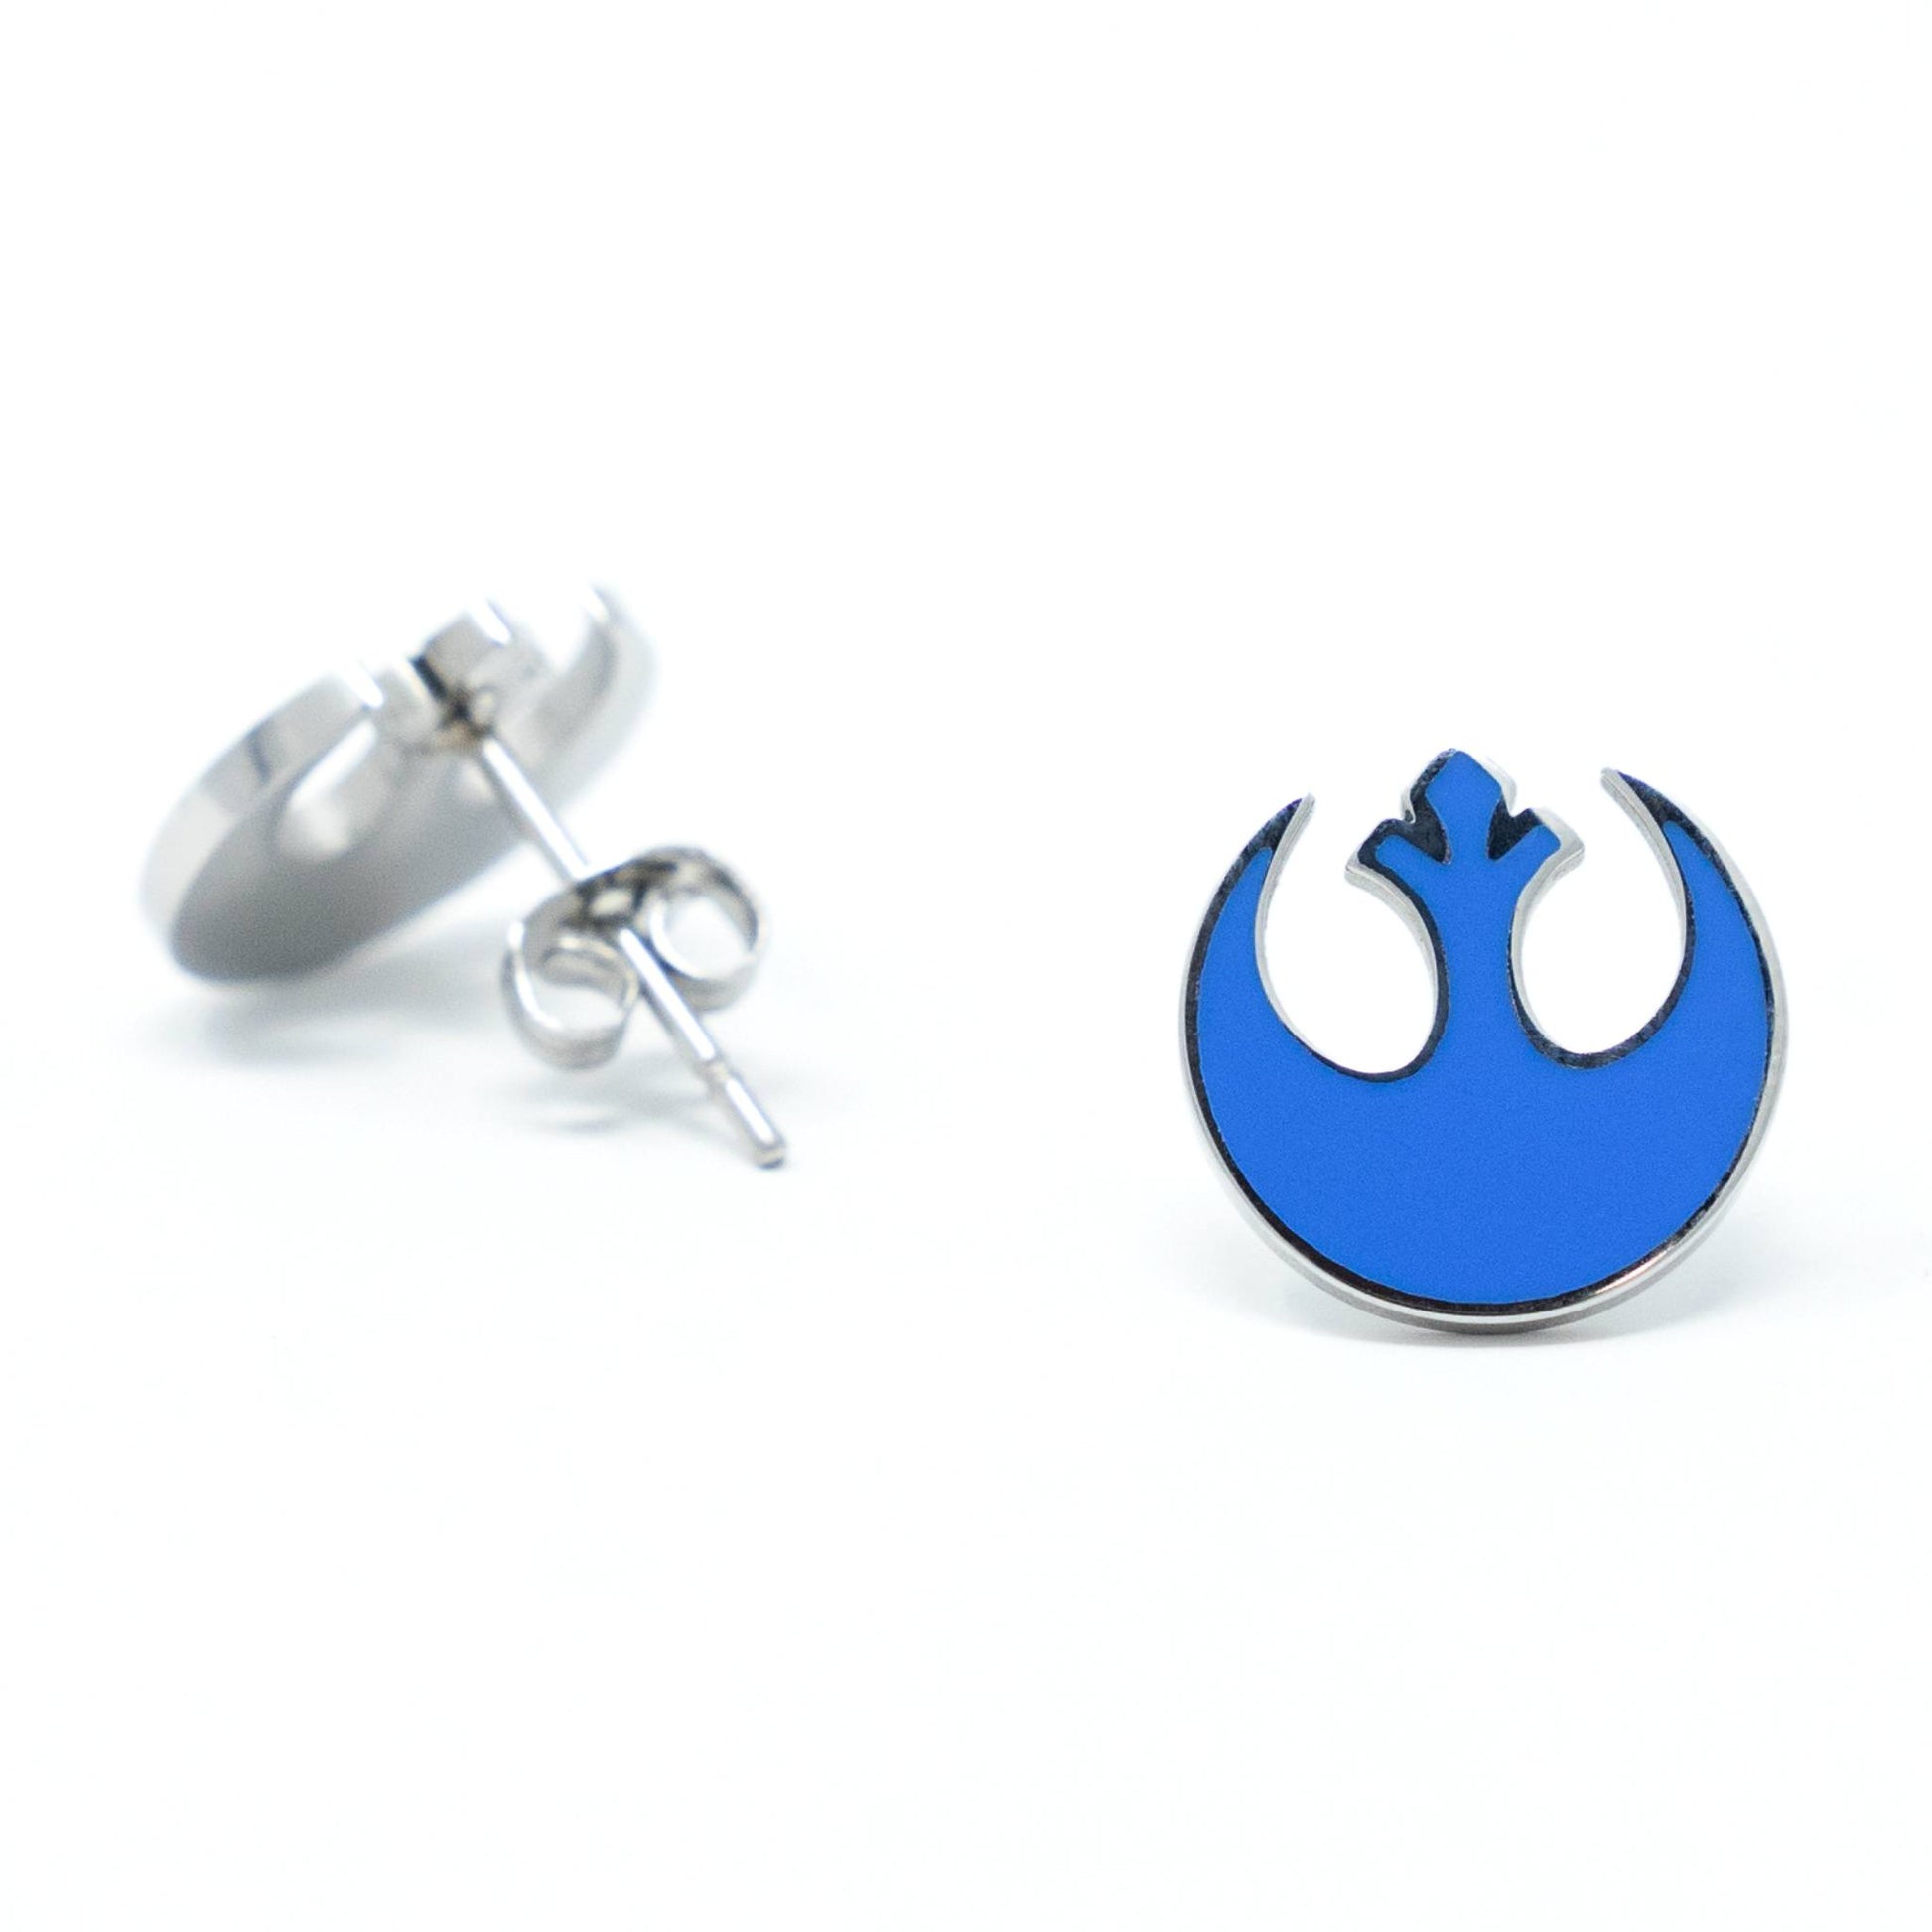 A pair of blue earrings featuring the rebel icon from Star Wars